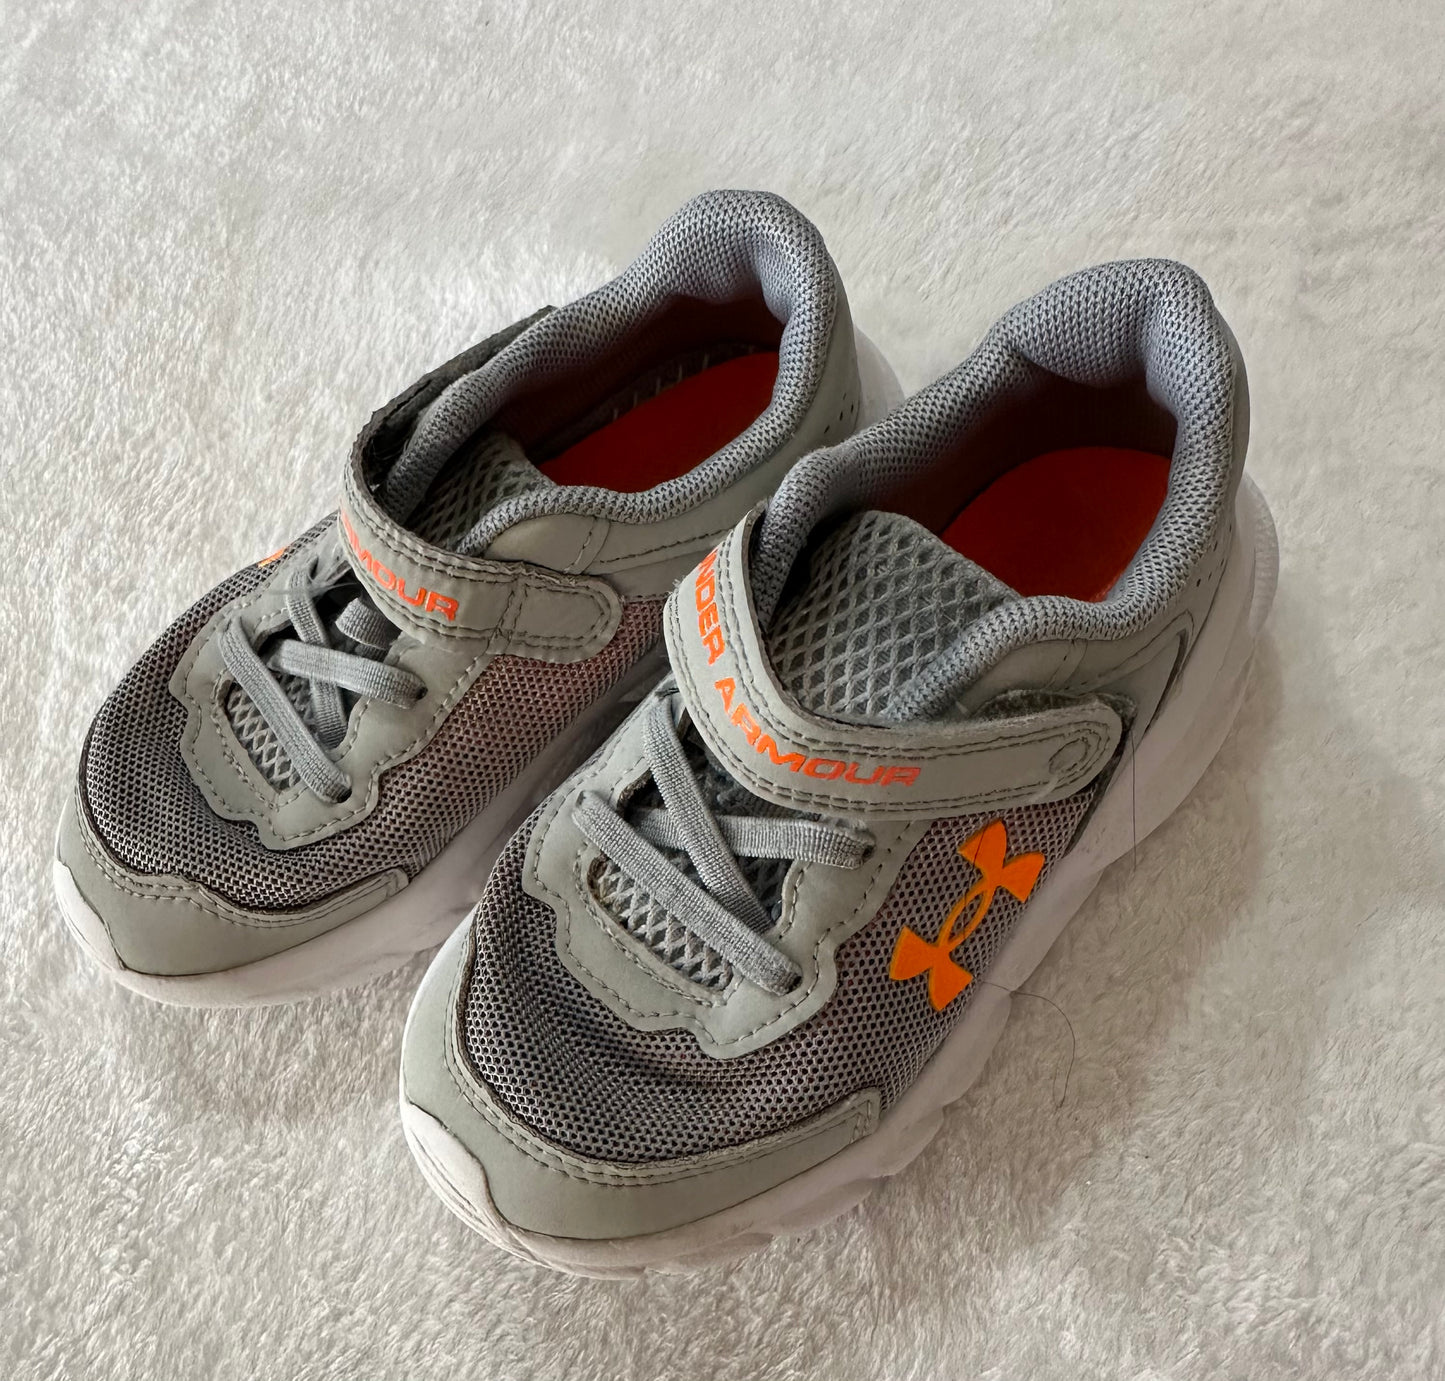 Boys toddler size 8 Under Armour gym shoes